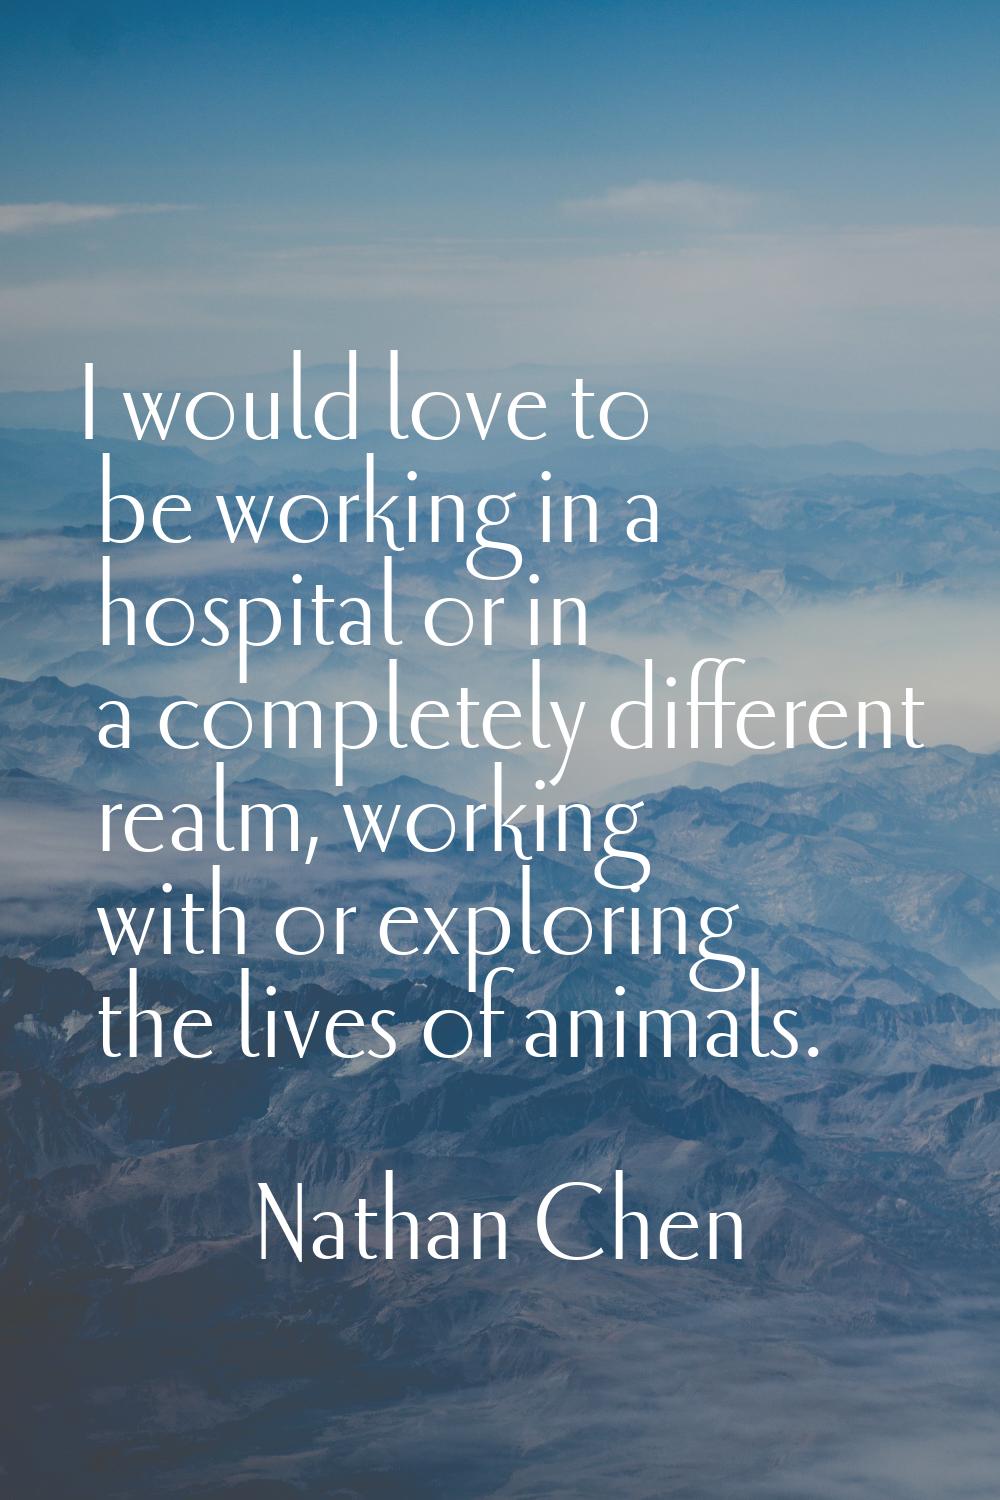 I would love to be working in a hospital or in a completely different realm, working with or explor